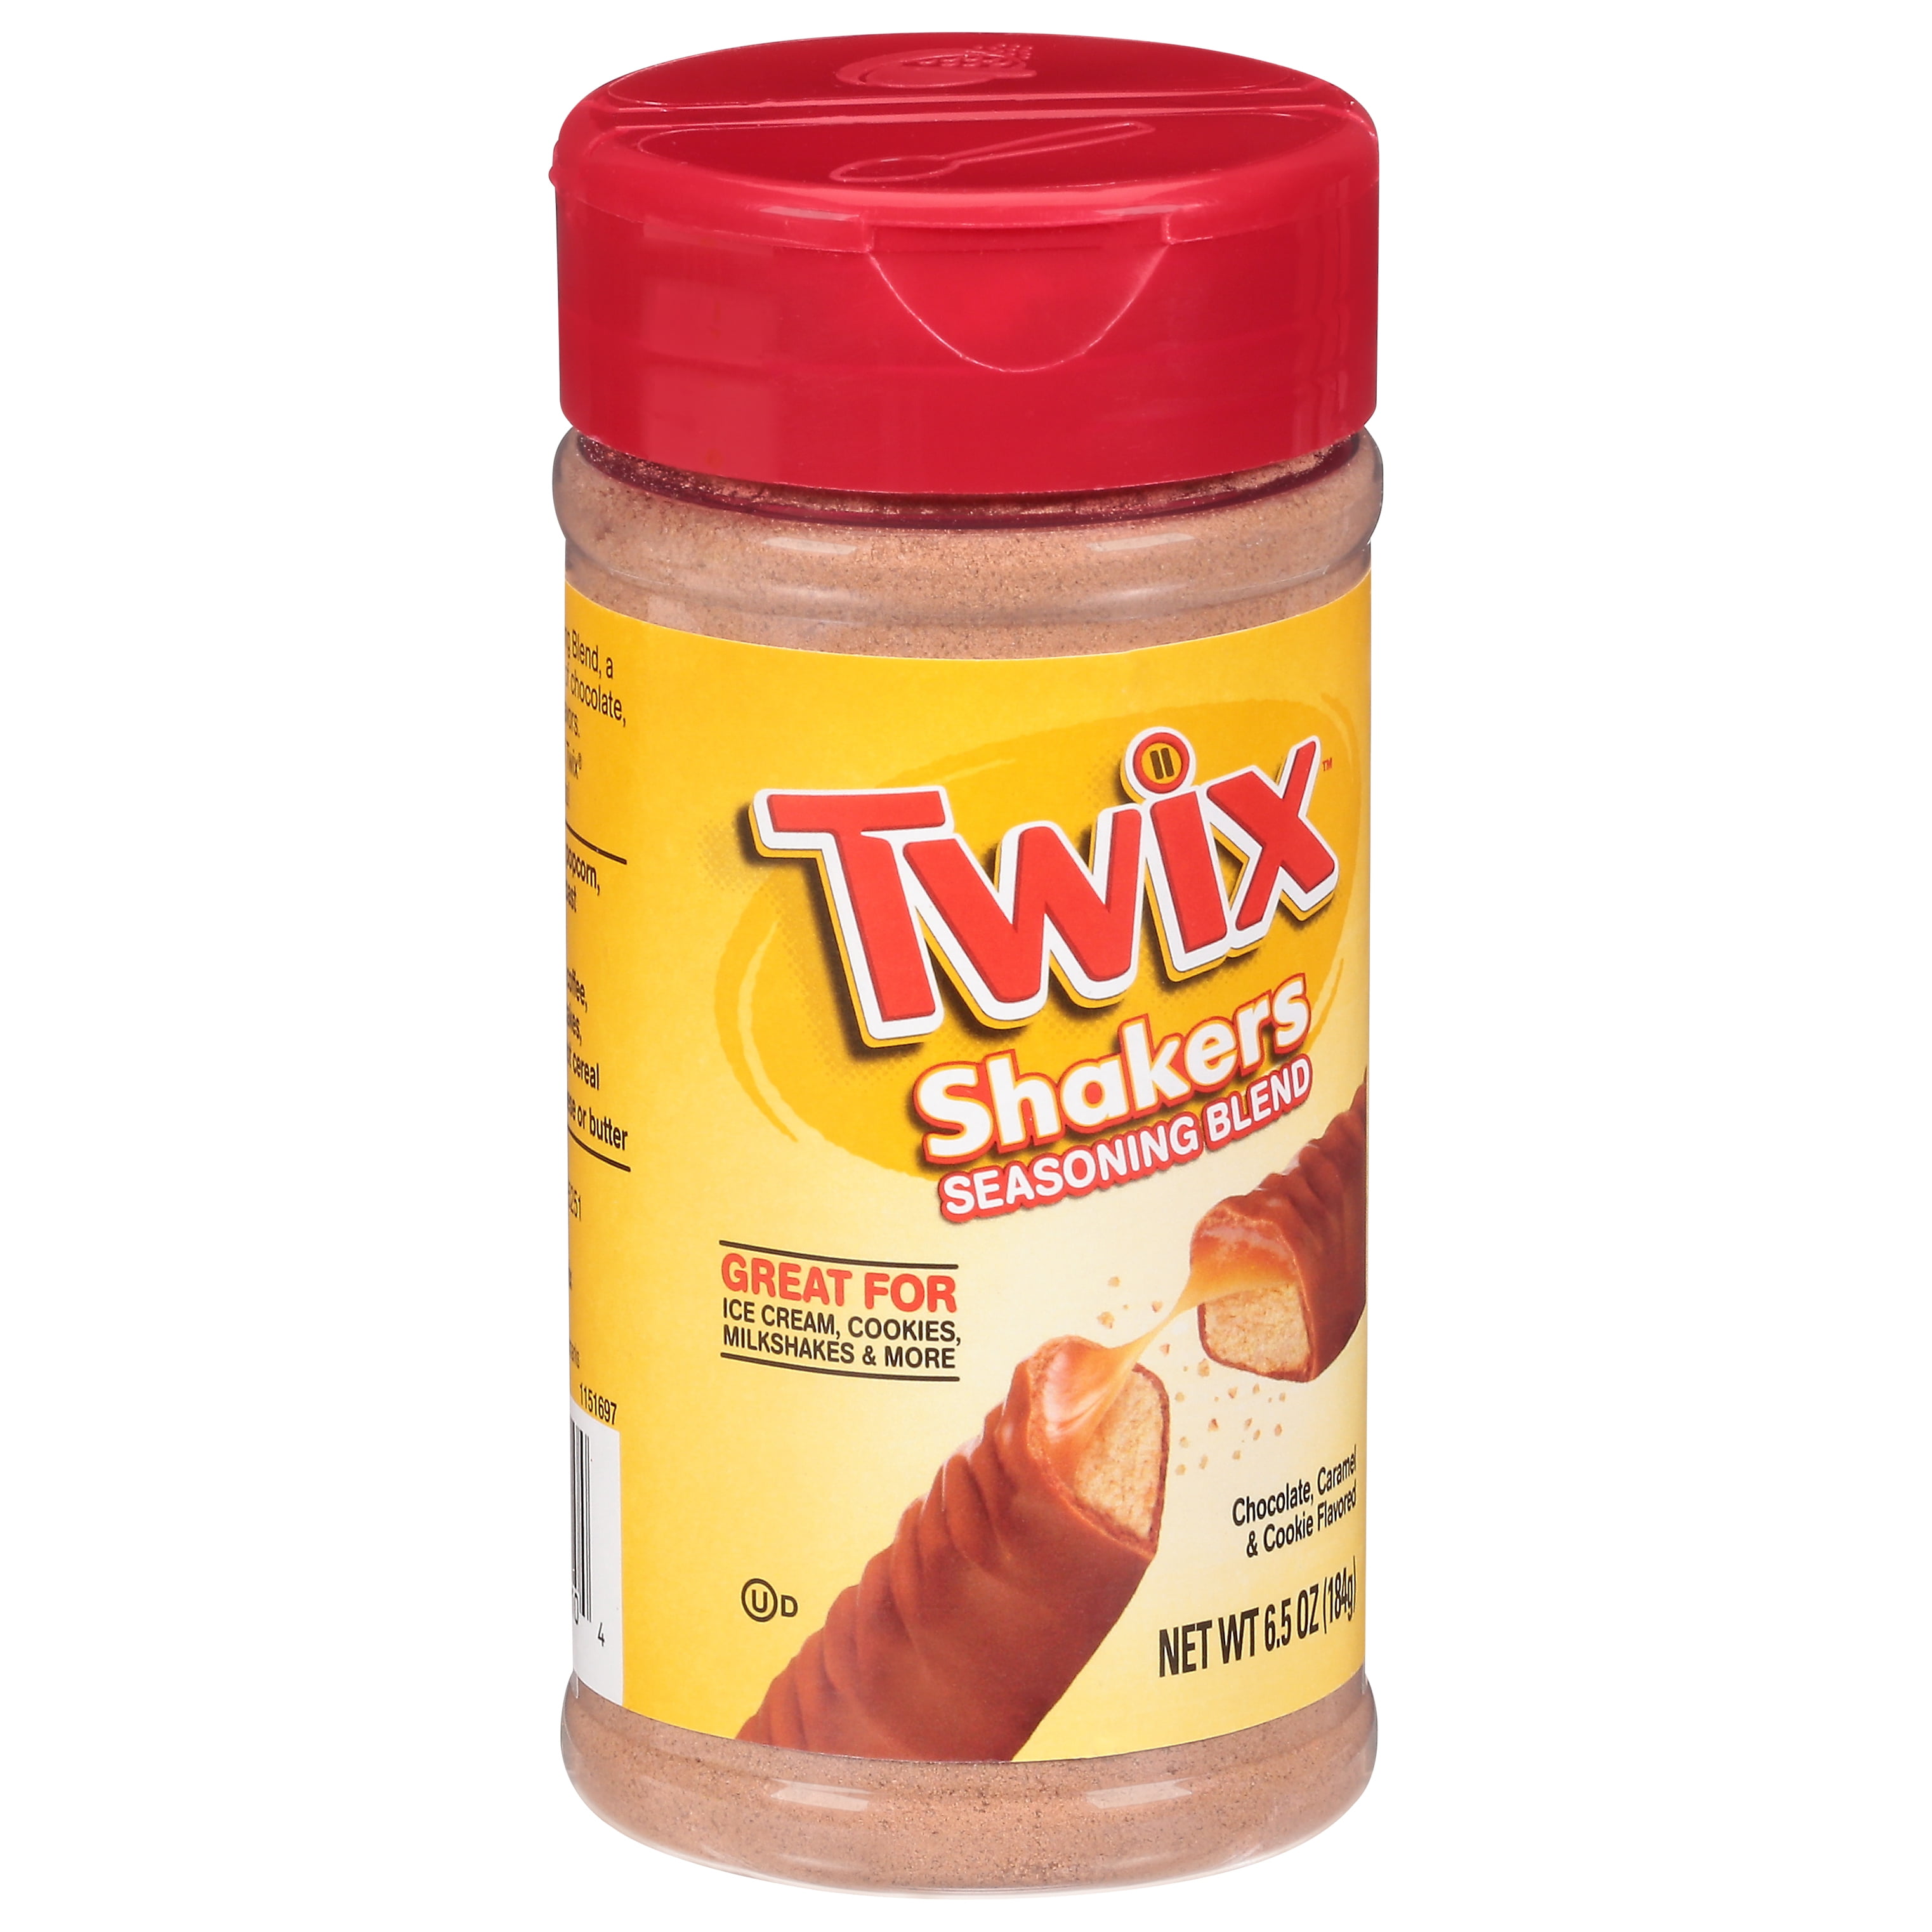 B&G TWIX Shakers Seasoning Blend Review: Can You Really Put it on